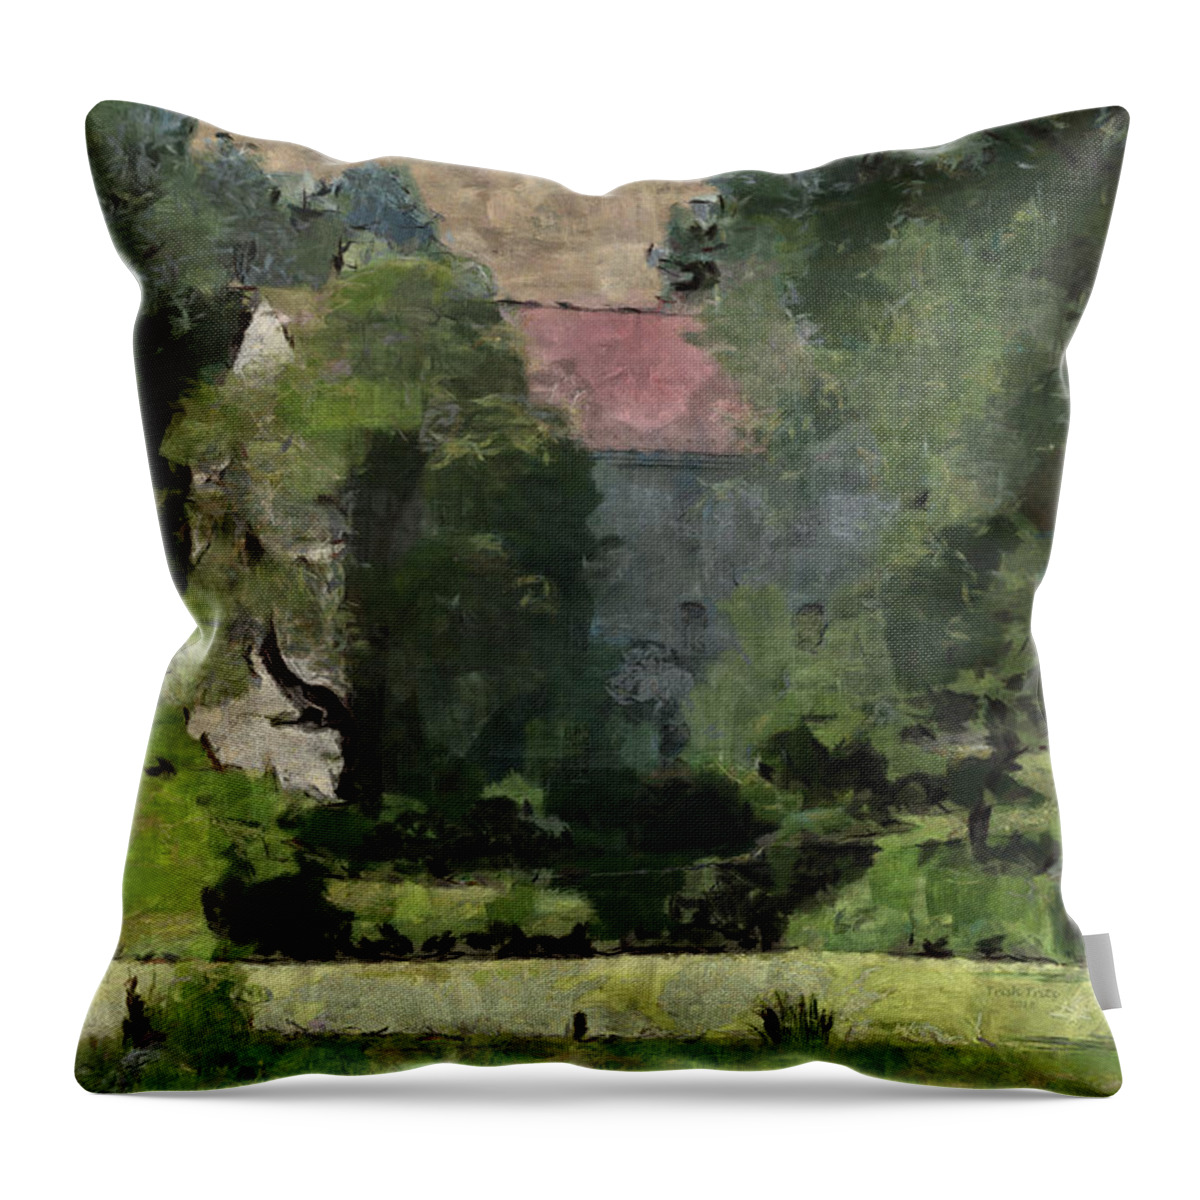 Oley Throw Pillow featuring the mixed media Oley Barn by Trish Tritz